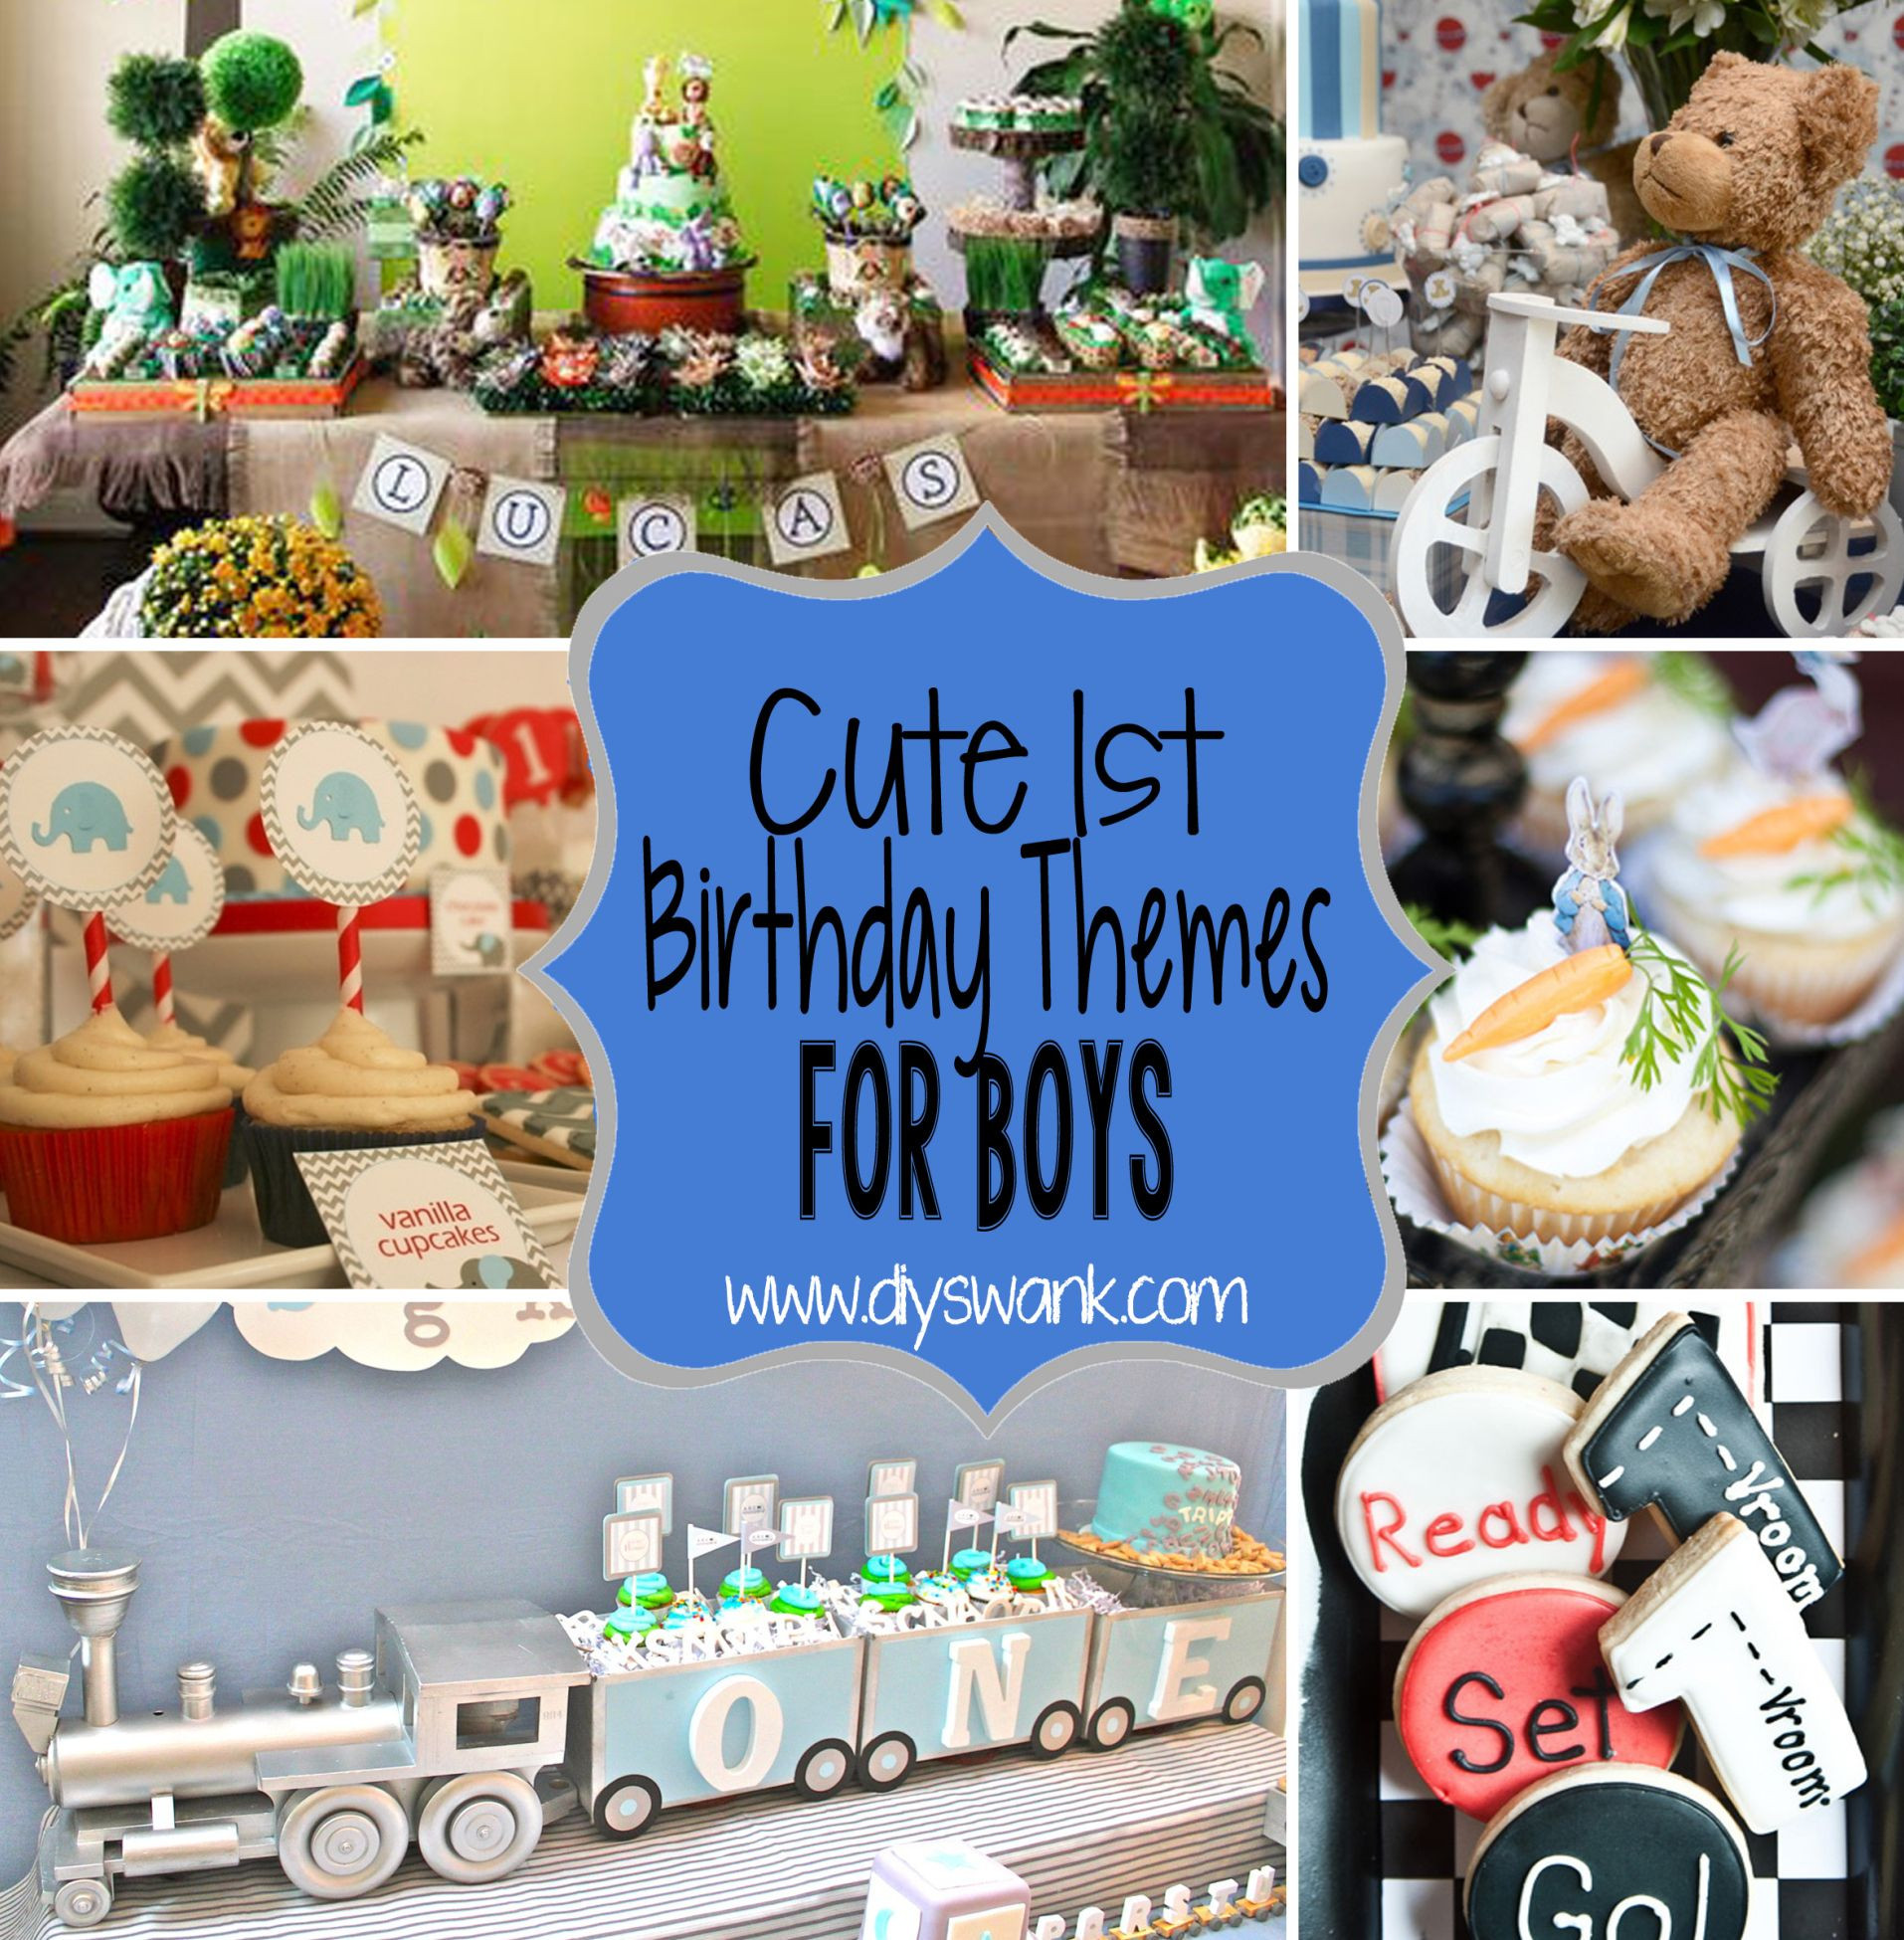 1st Birthday Boy Decorations
 Cute Boy 1st Birthday Party Themes With images